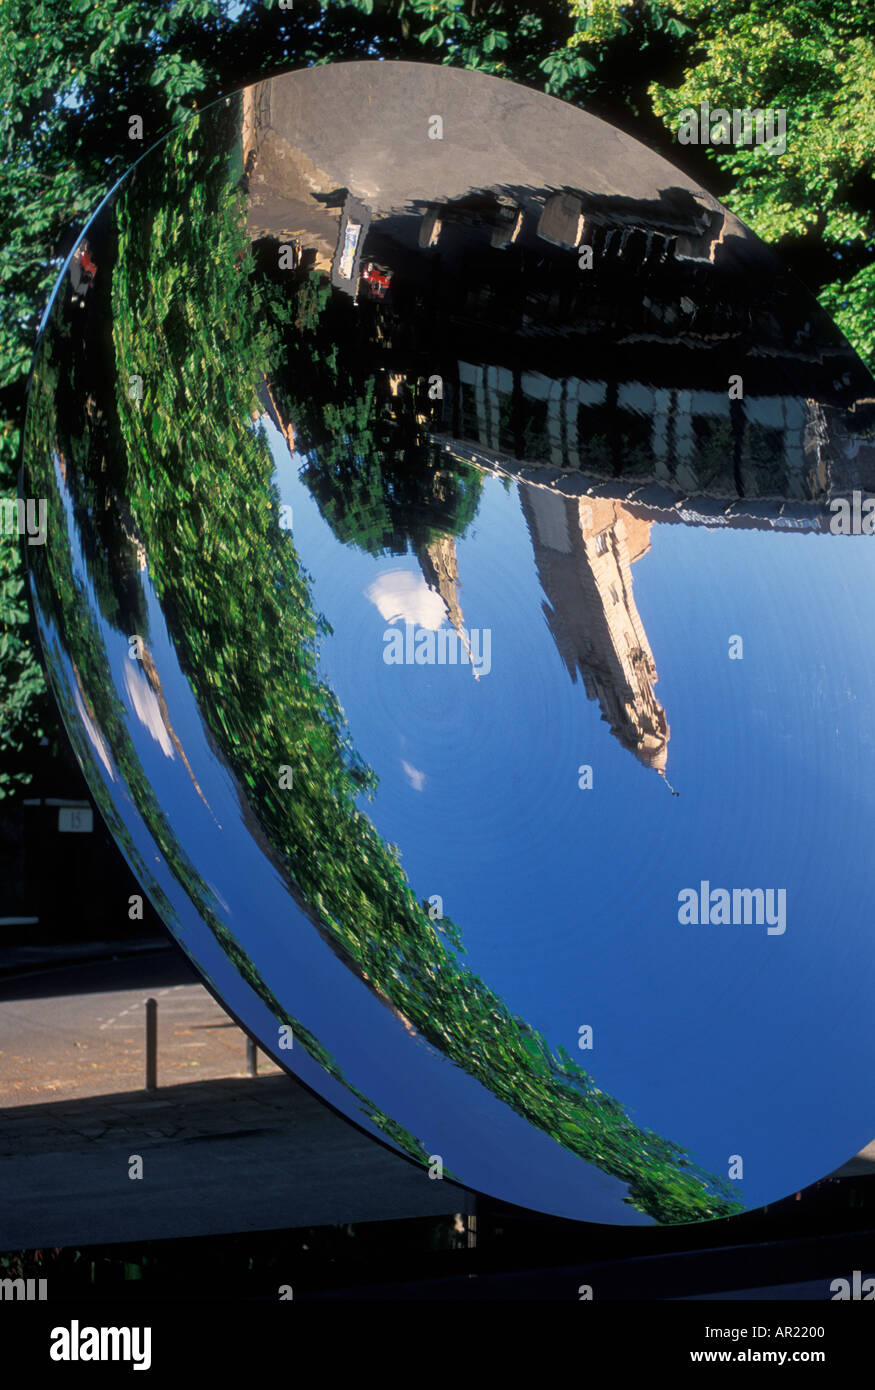 The stainless steel Sky Mirror outside the Nottingham Playhouse theatre Nottingham England GB UK Europe Stock Photo